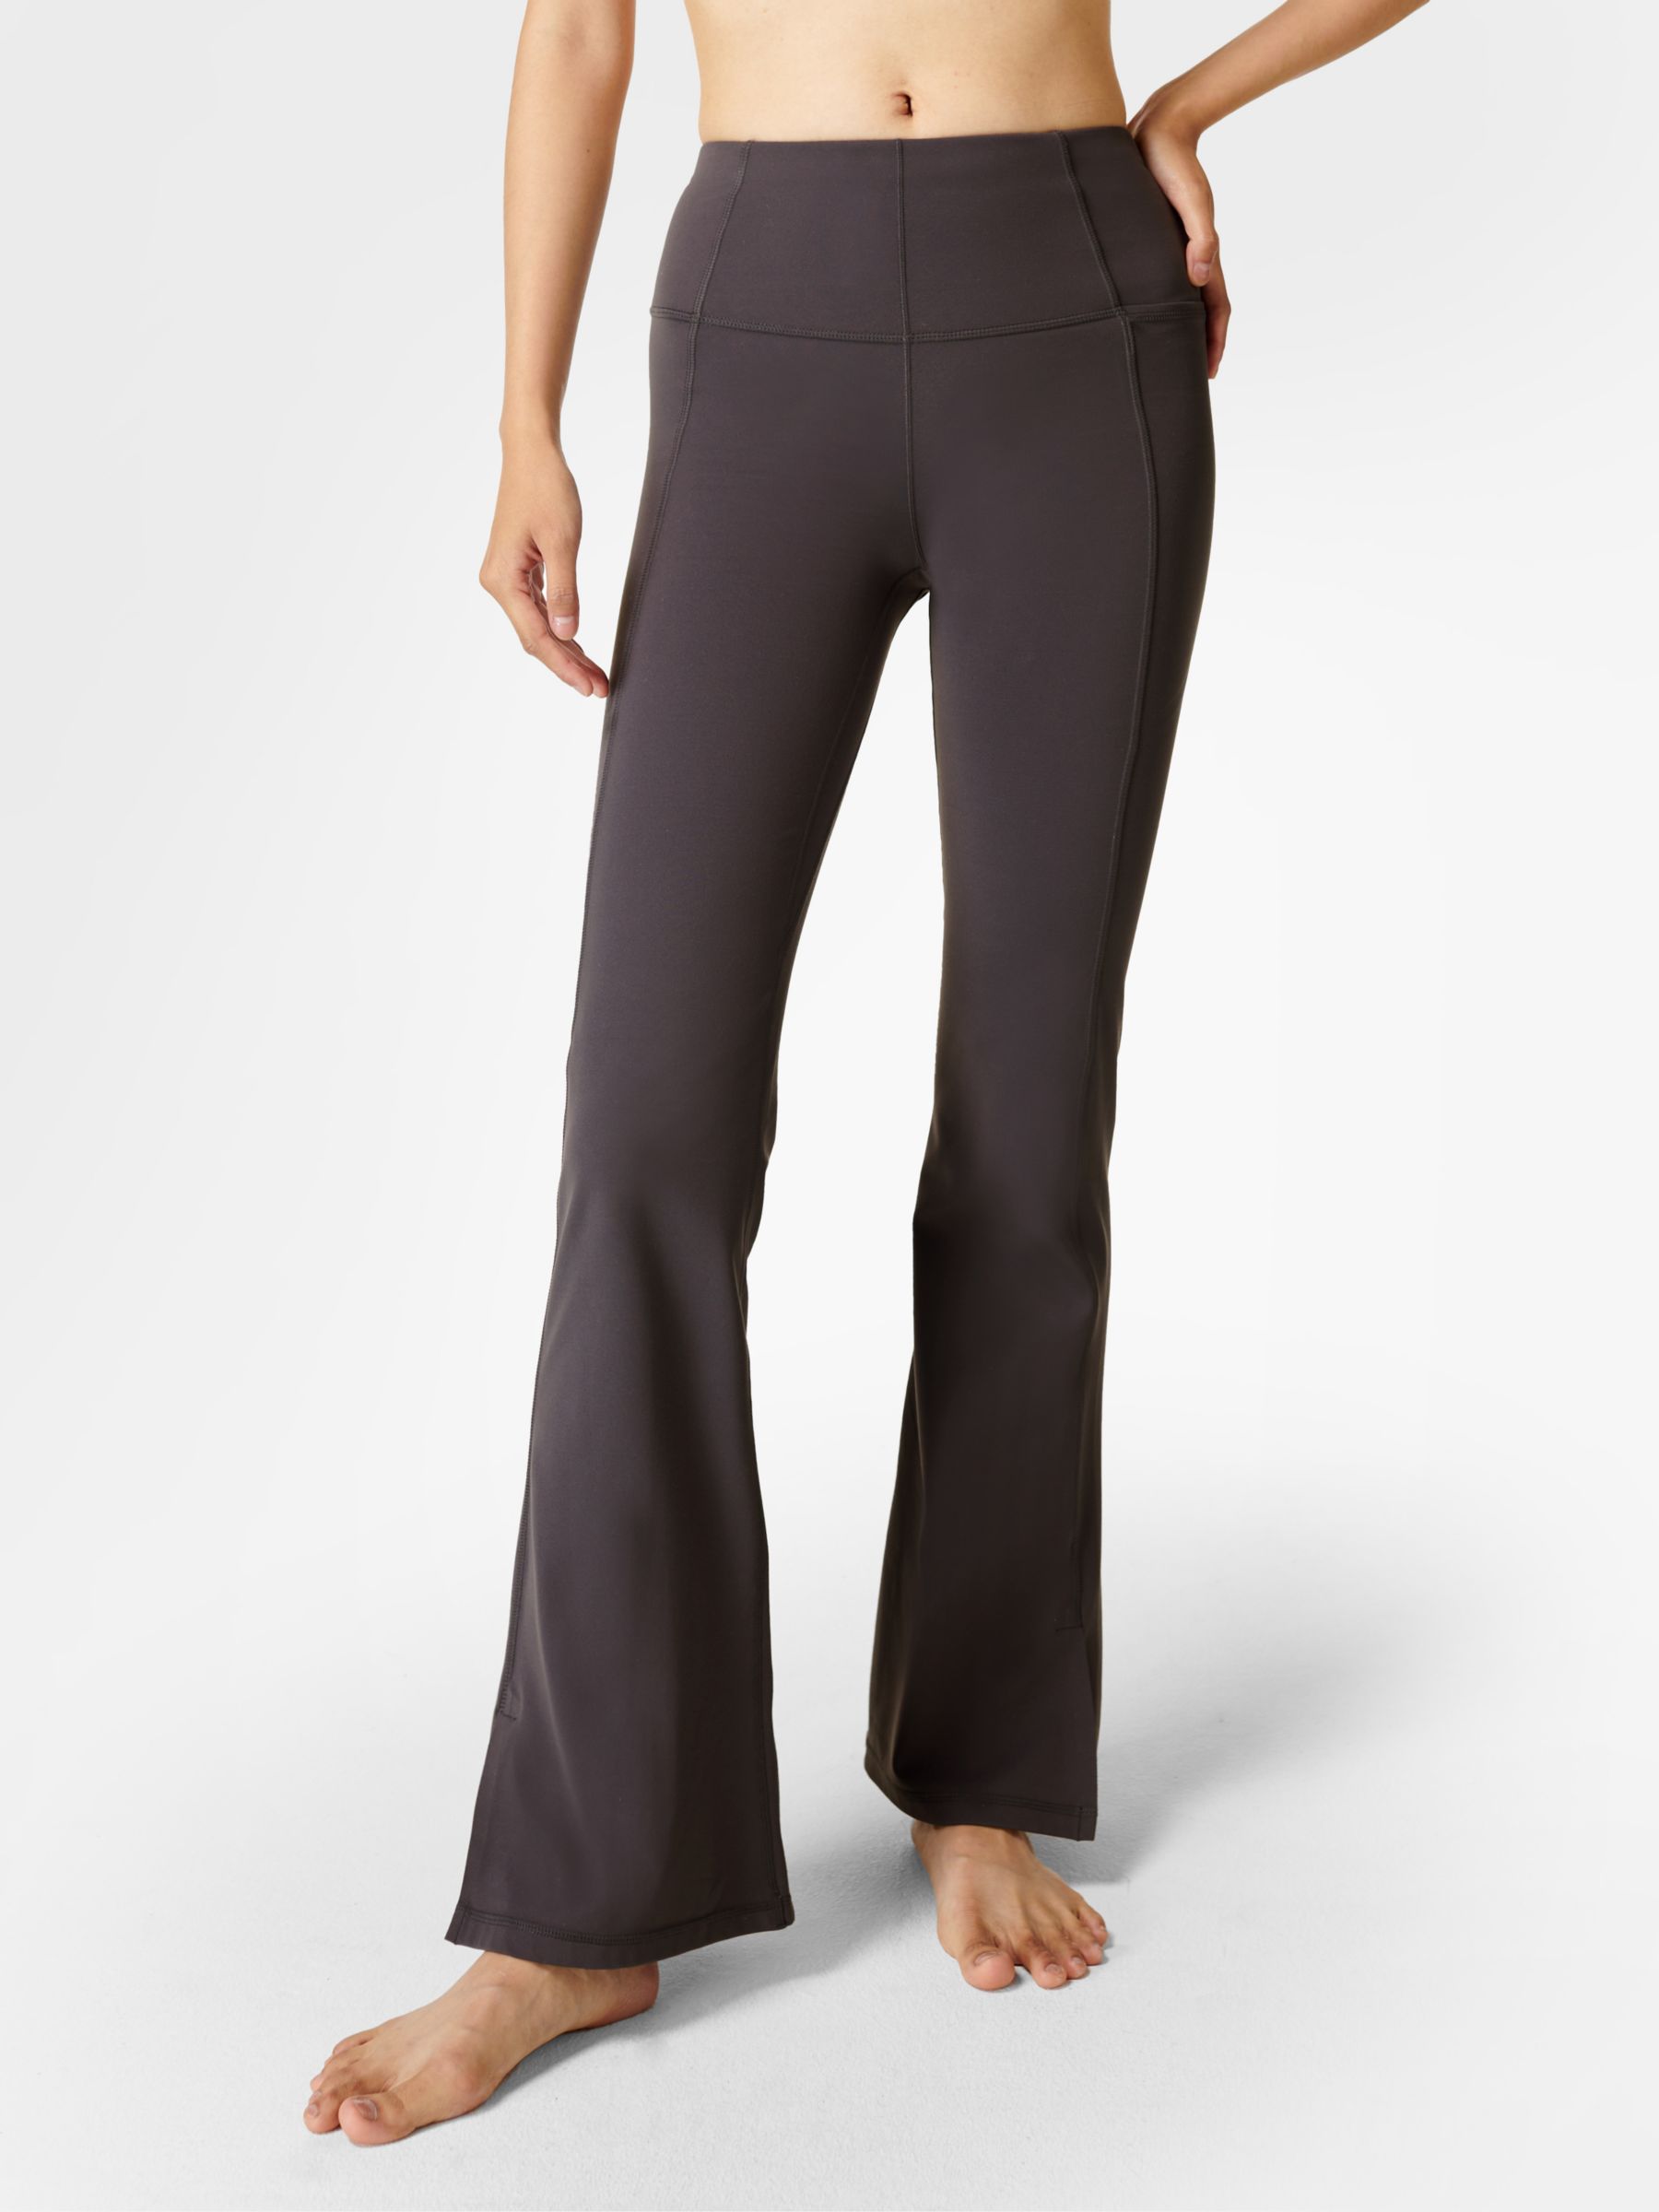 Shop Sweaty Betty Women's Cropped Trousers up to 50% Off